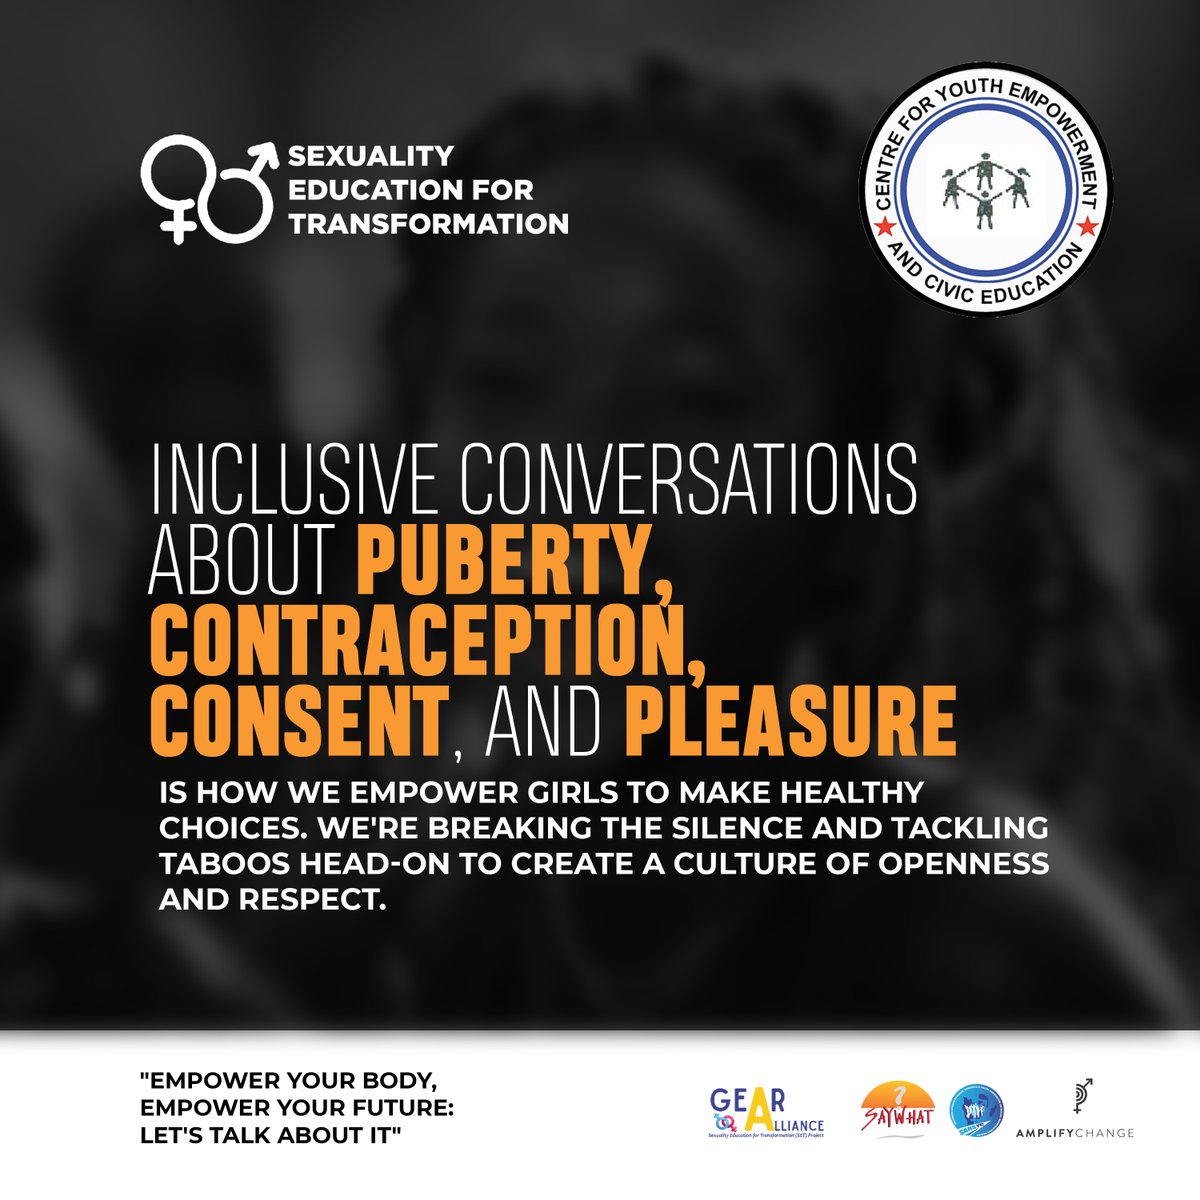 Inclusive conversations about puberty, contraception, consent, and pleasure is how we empower girls to make healthy choices. We're breaking the silence and tackling taboos head-on to create a culture of openness and respect.